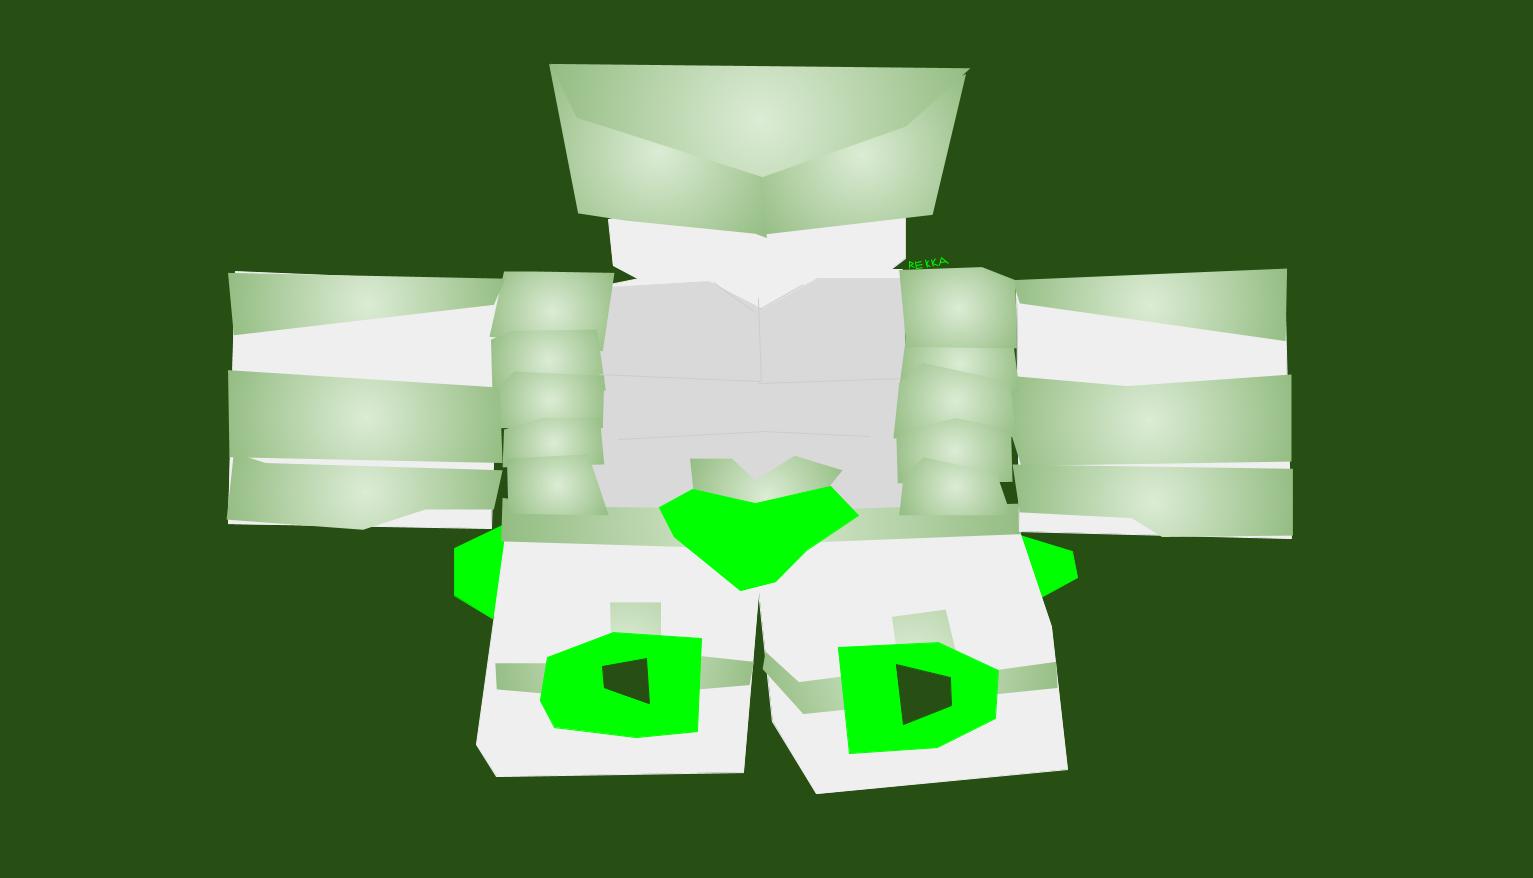 I M Gonna Remake Old Stand Models In This Art Style Fandom - thoughts recently remade an old model i had roblox